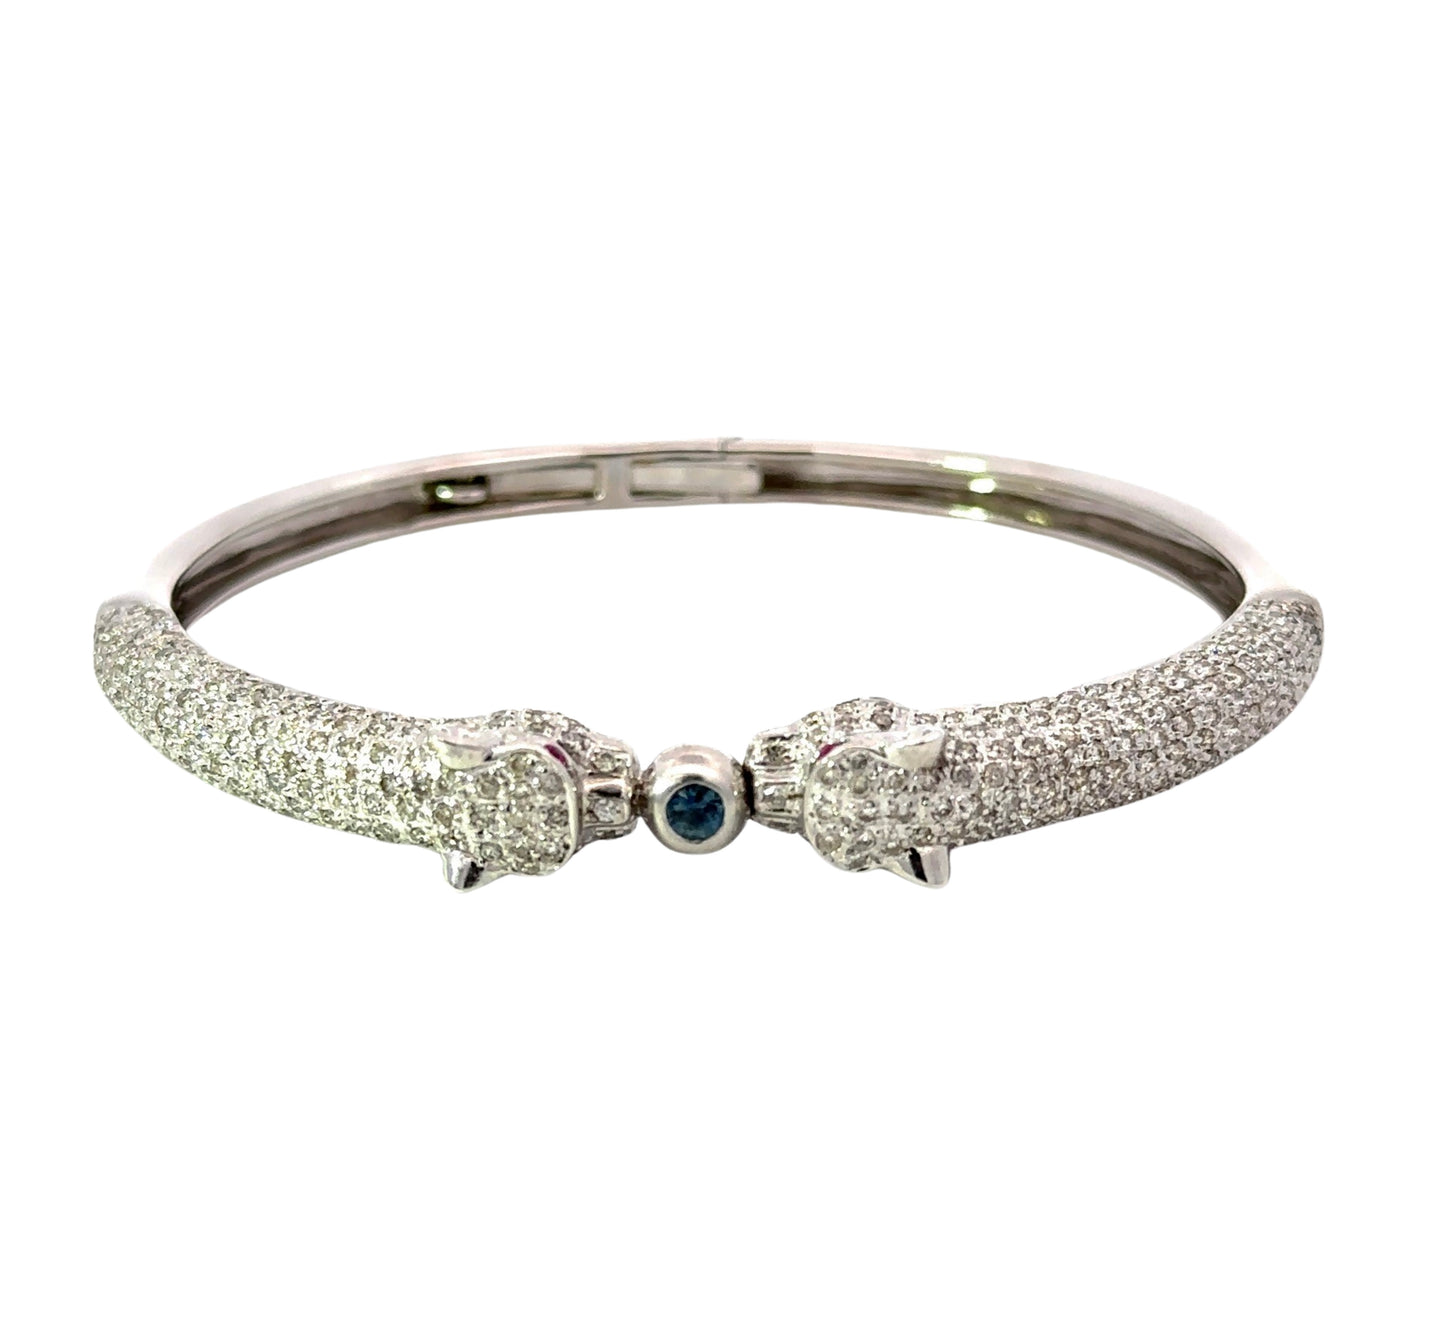 Top view of white gold bangle with diamond panthers and 1 blue gemstone for the lock